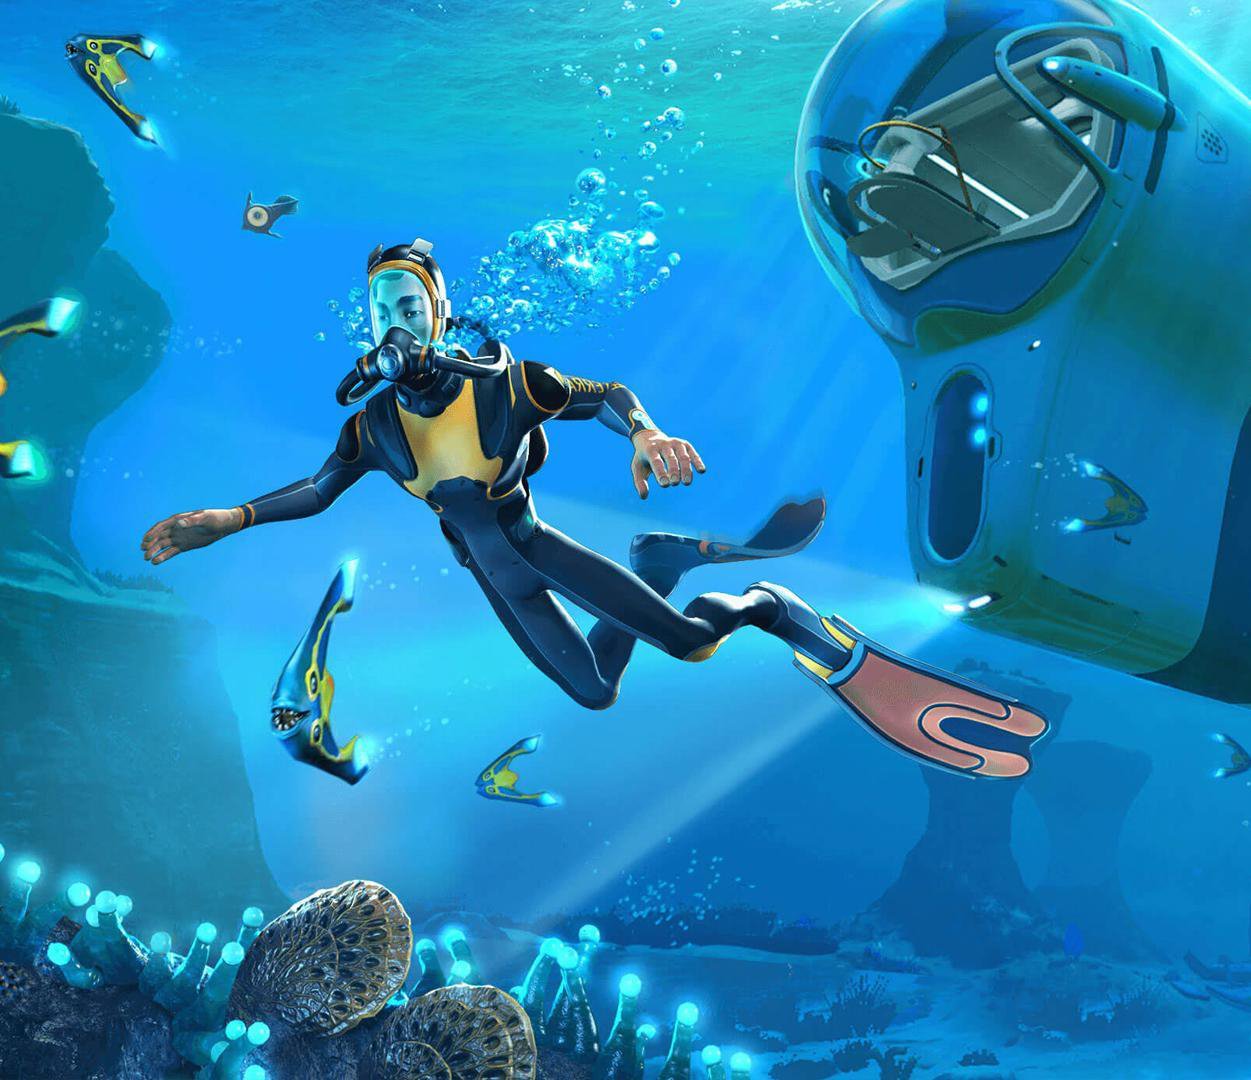 will there be a new subnautica game